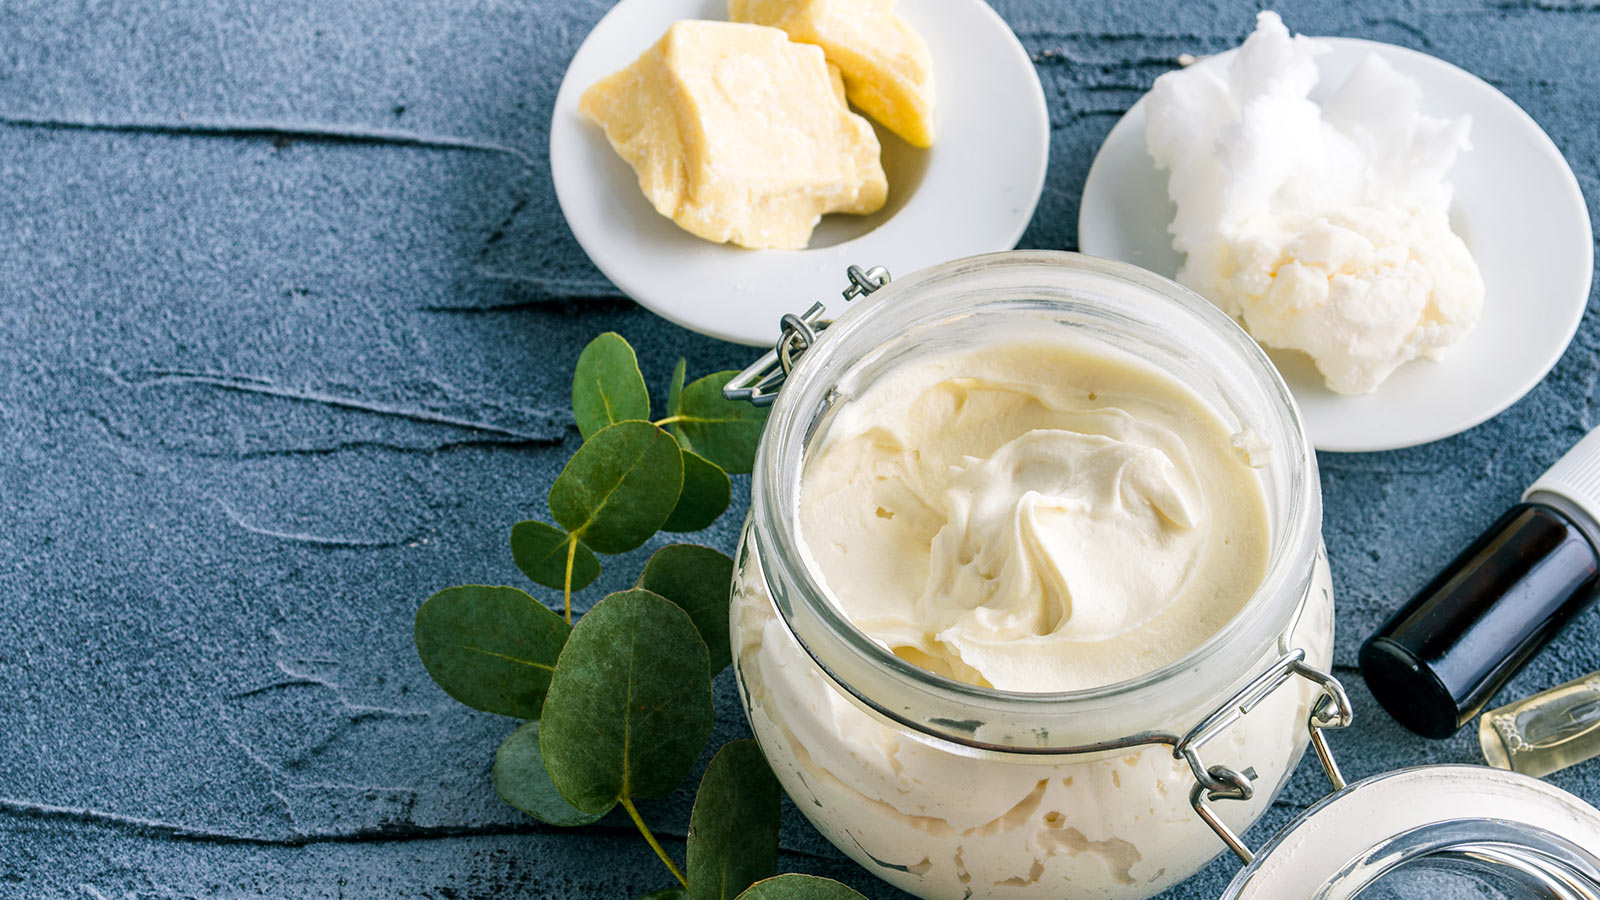 Is Body Butter Good For Your Body?